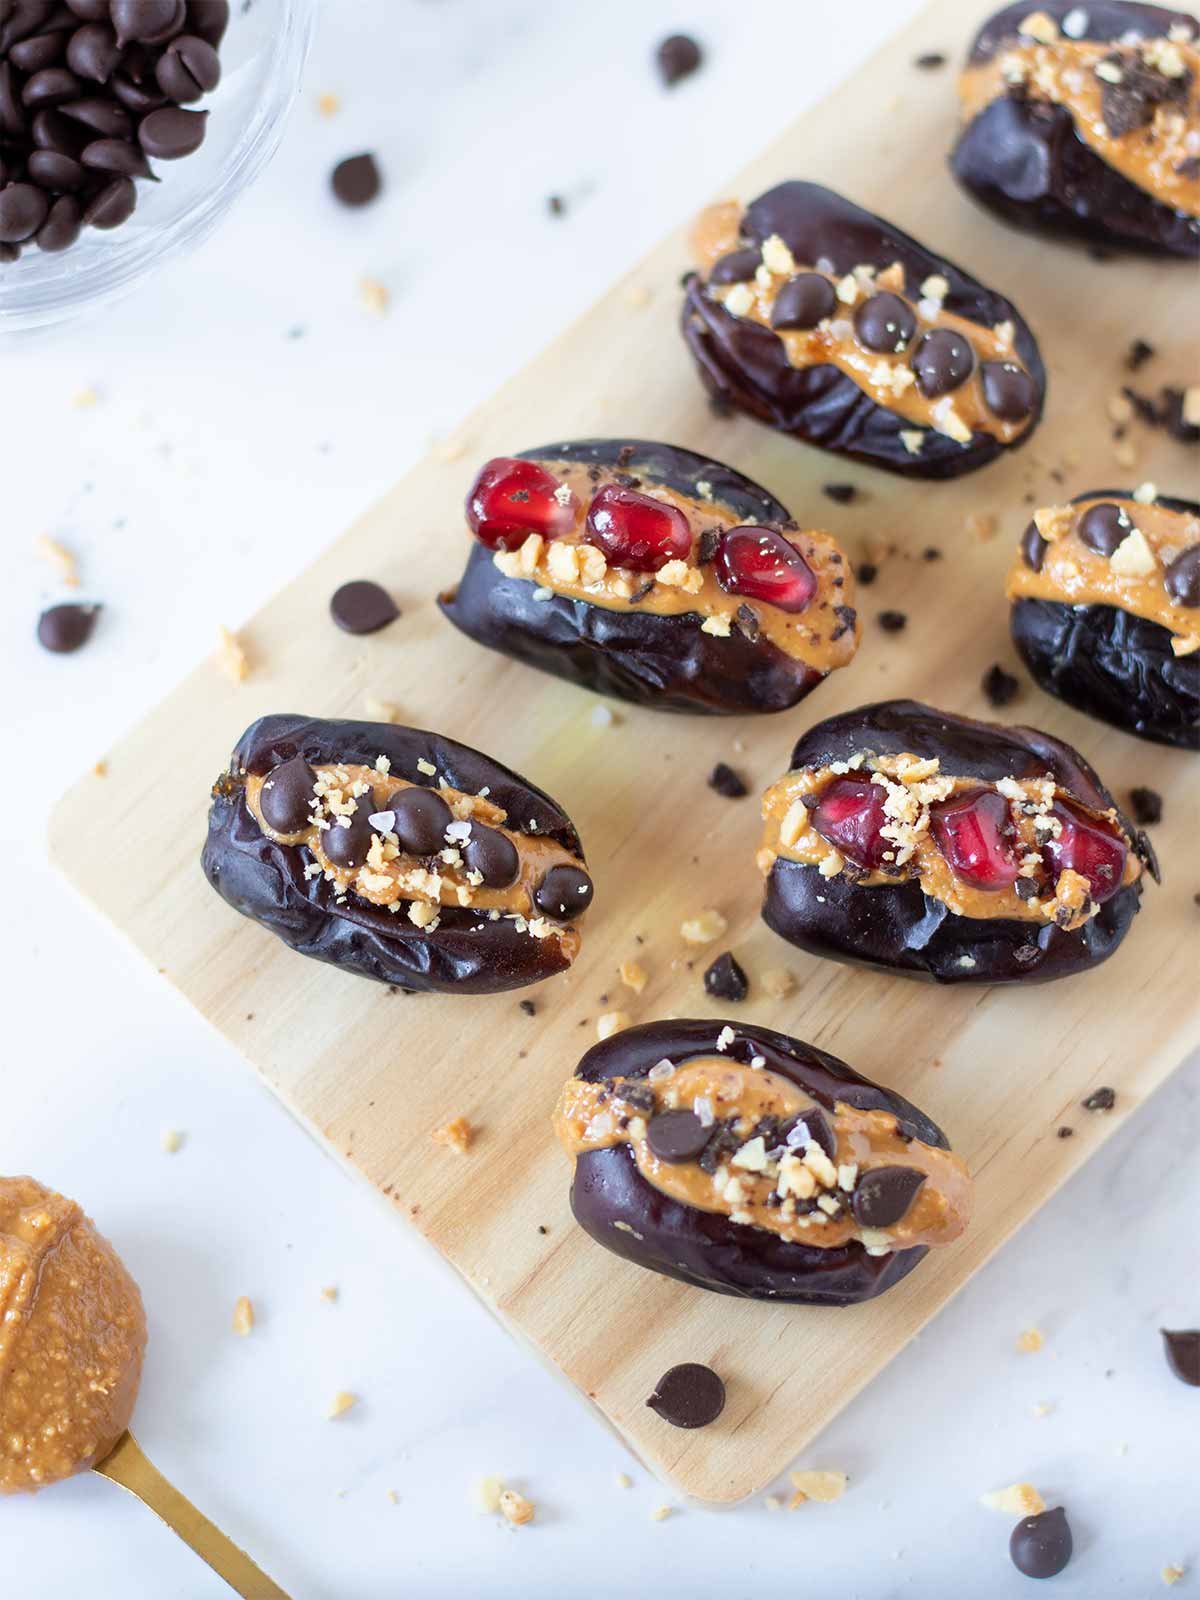 Mazafati dates filled with natural creamy peanut butter decorated with mini chocolate chips, chipped dark chocolate, chopped peanuts, and pomegranate arils on wooden board